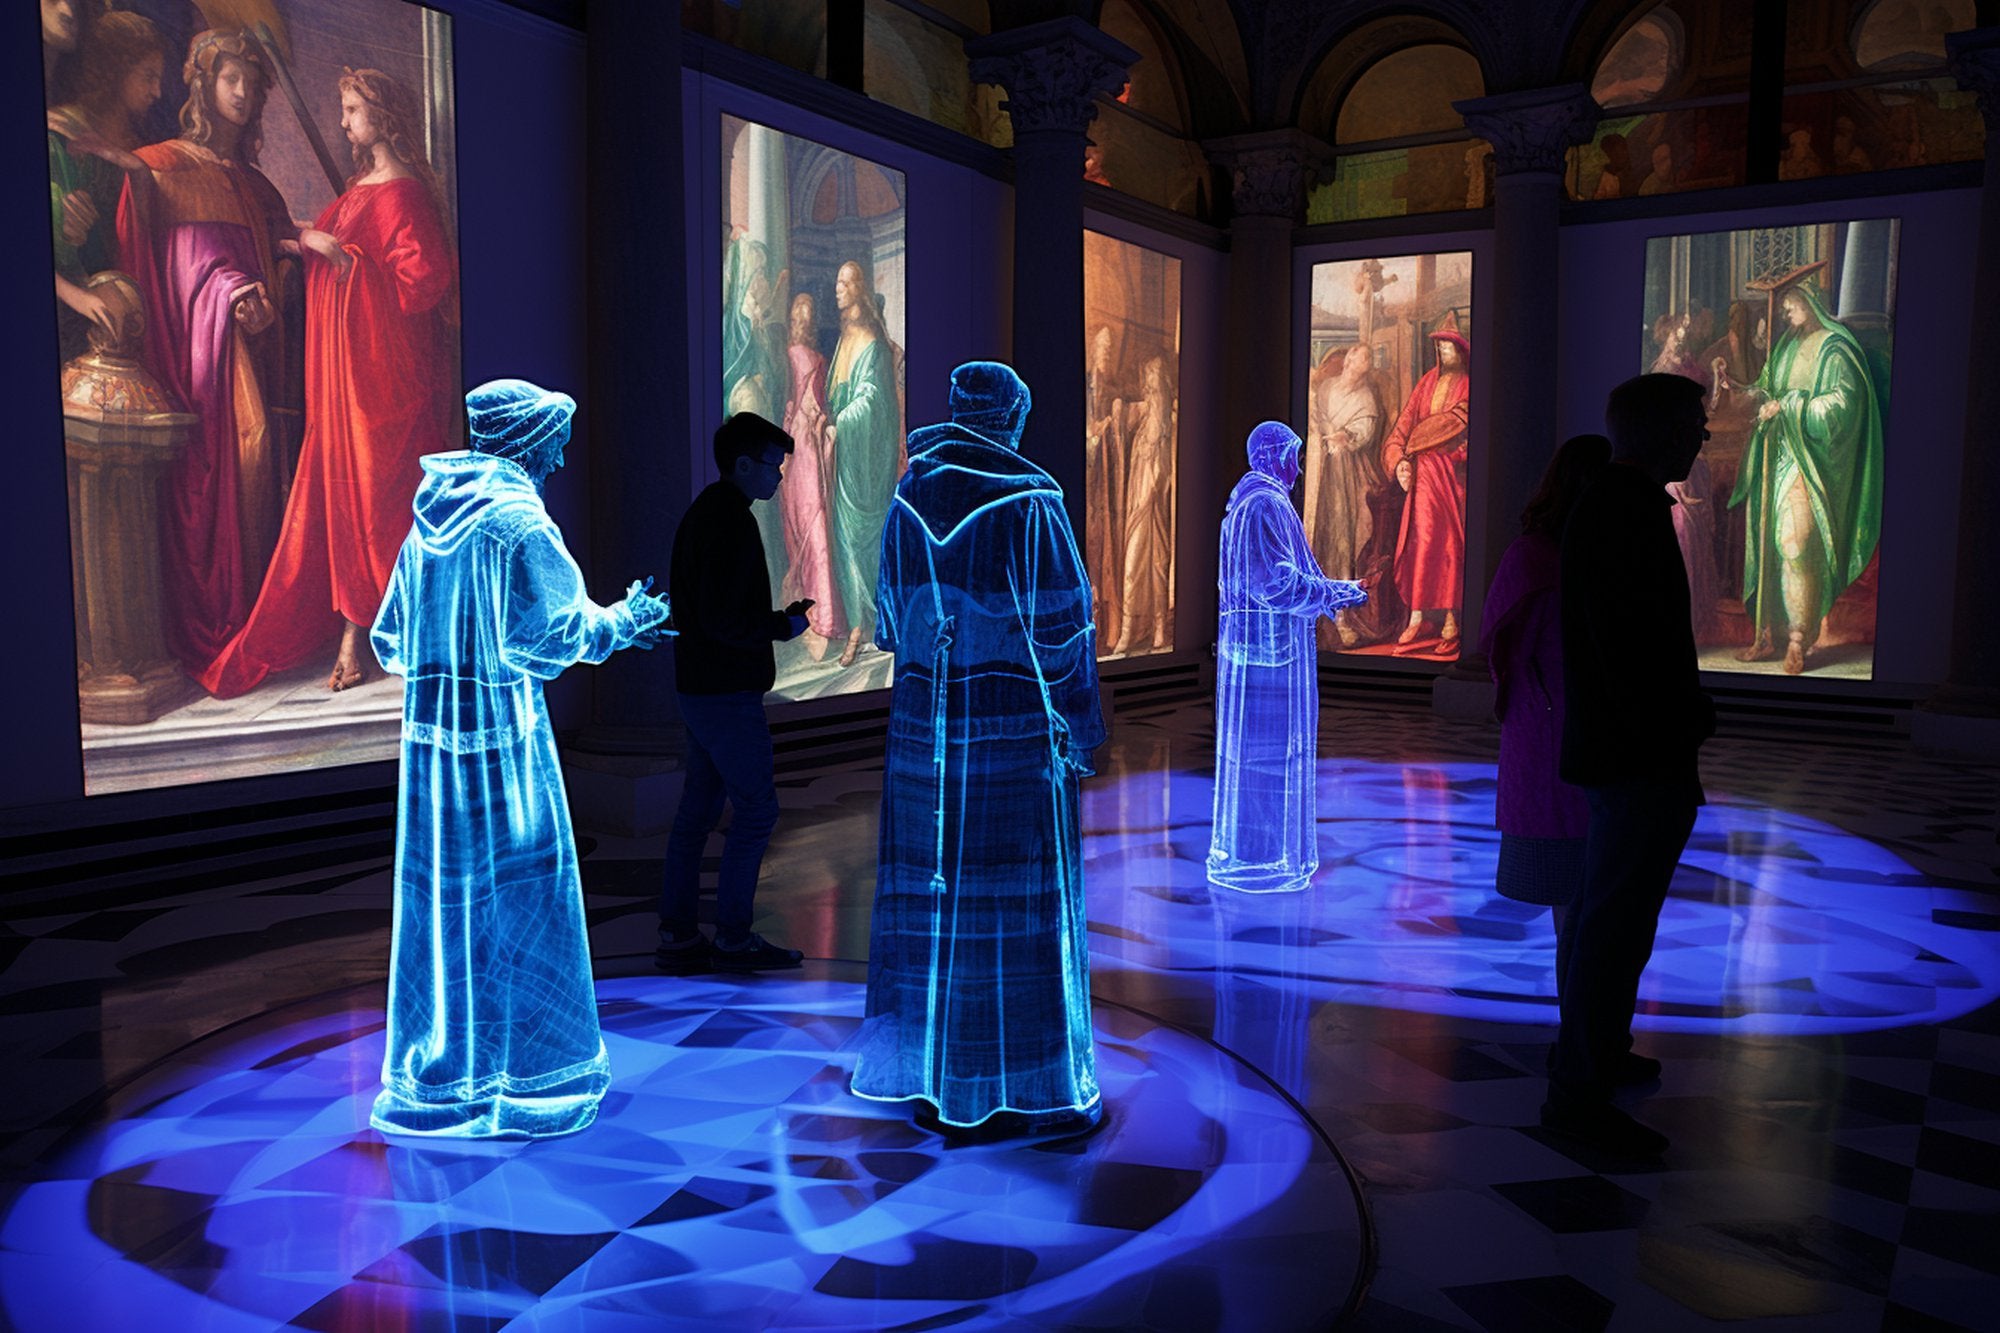 Holograms of the Medici family visiting thier MET exhibition. AI art by Pixel Gallery